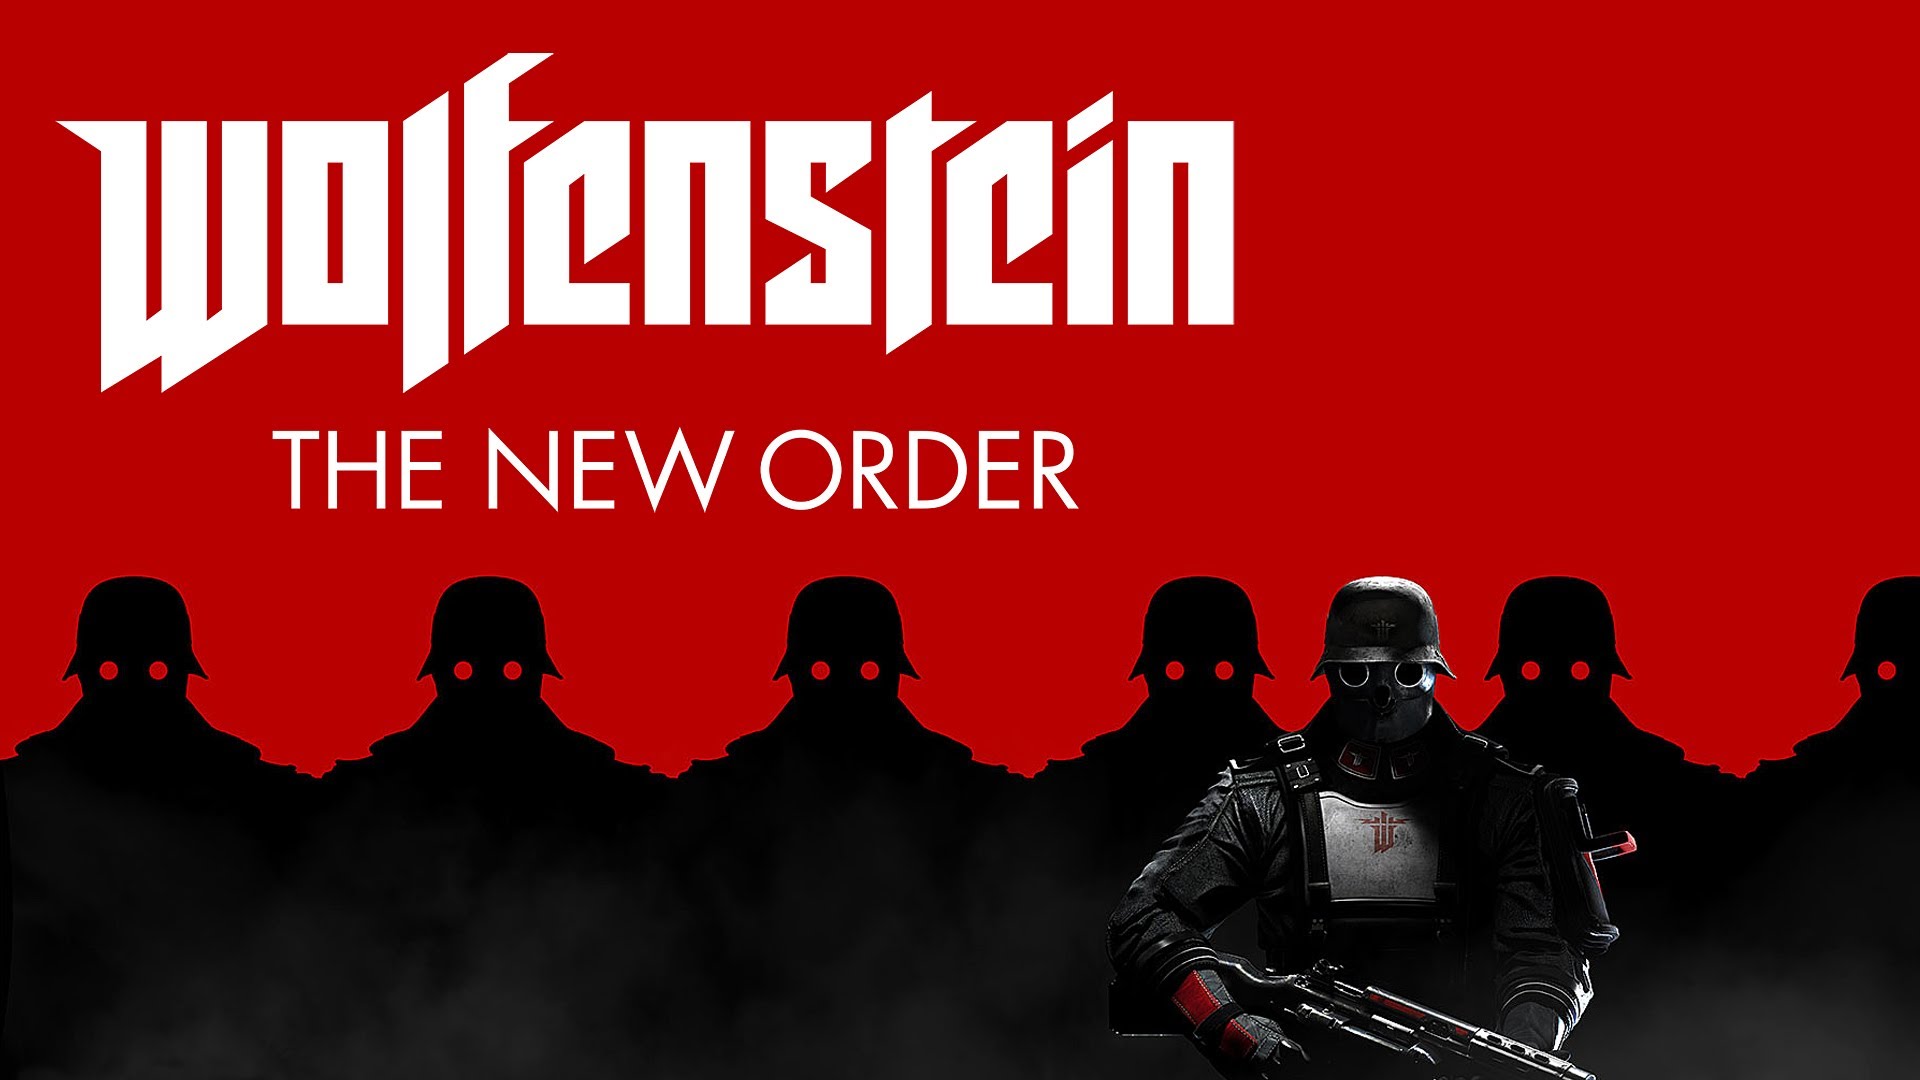 Wolfenstein: The New Order Backgrounds, Compatible - PC, Mobile, Gadgets| 1920x1080 px